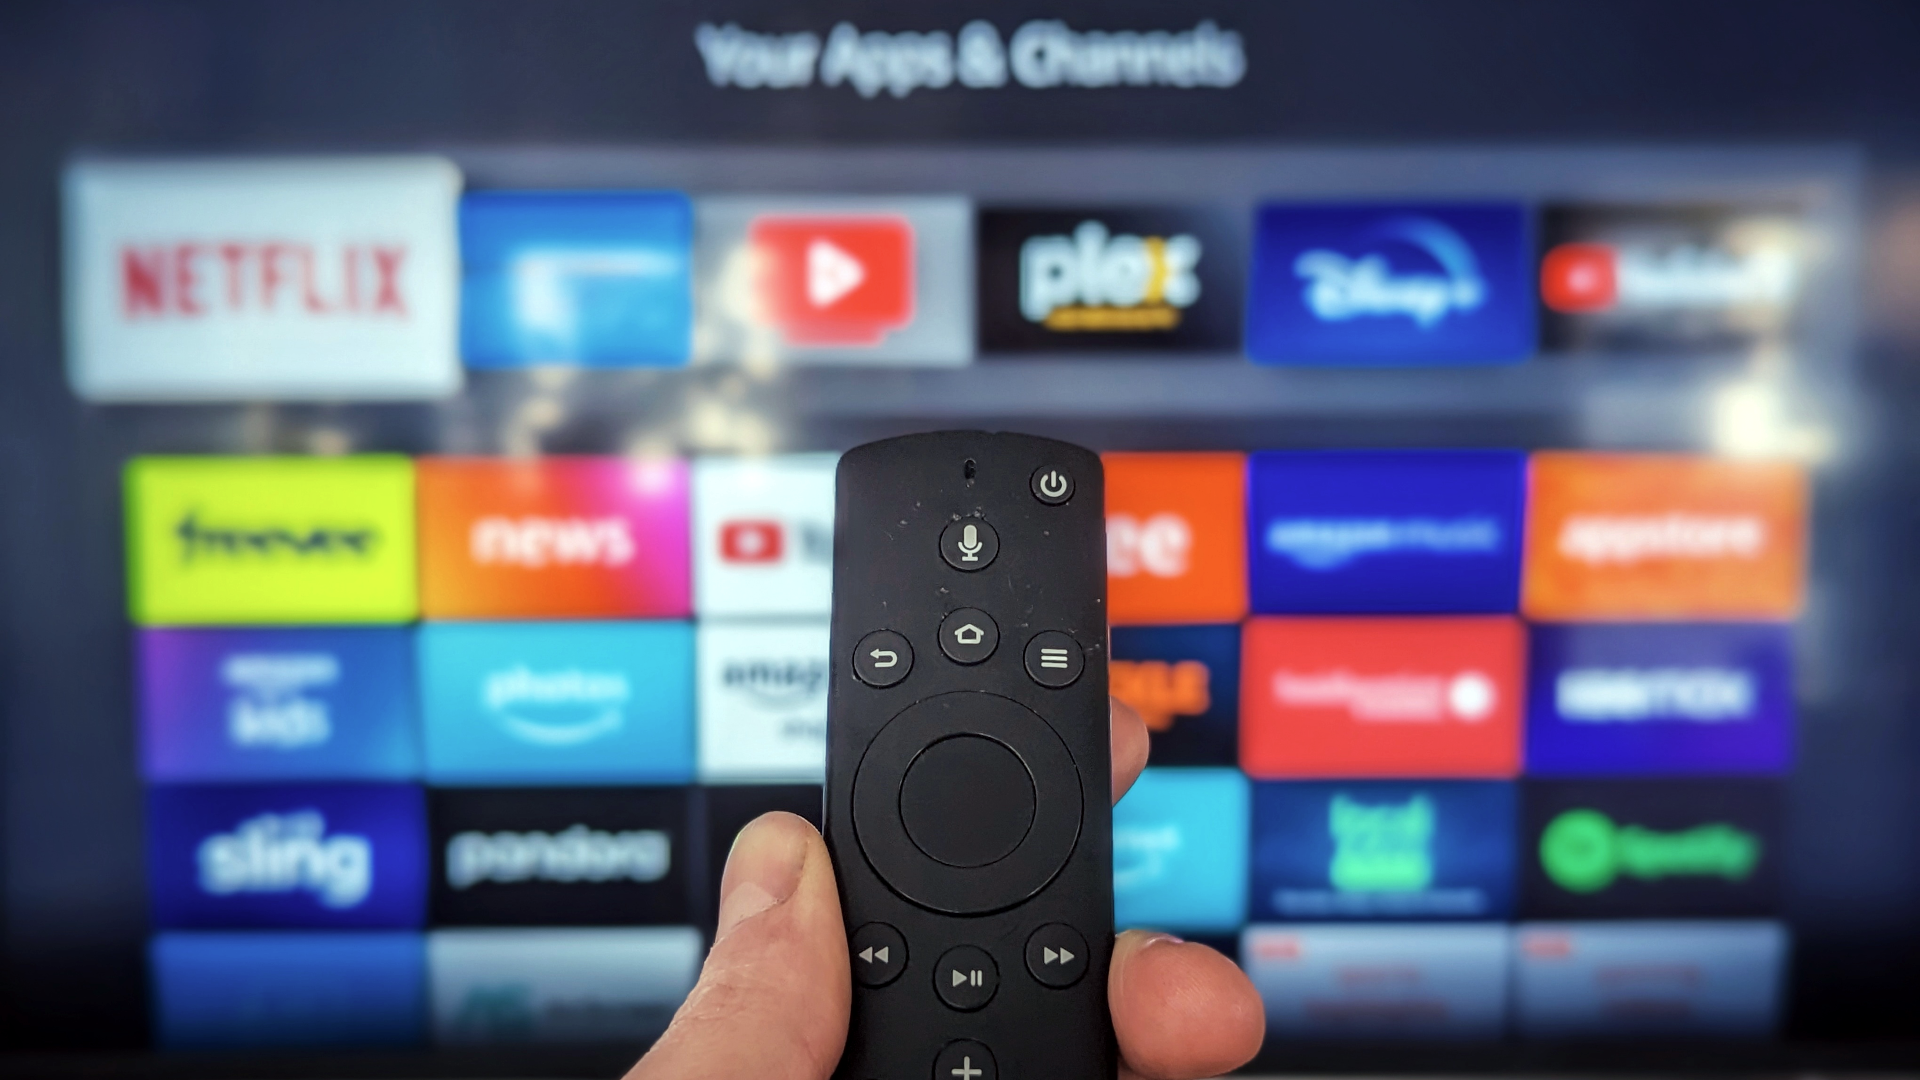 Do you need a Fire TV Stick with your Smart TV? Find here!